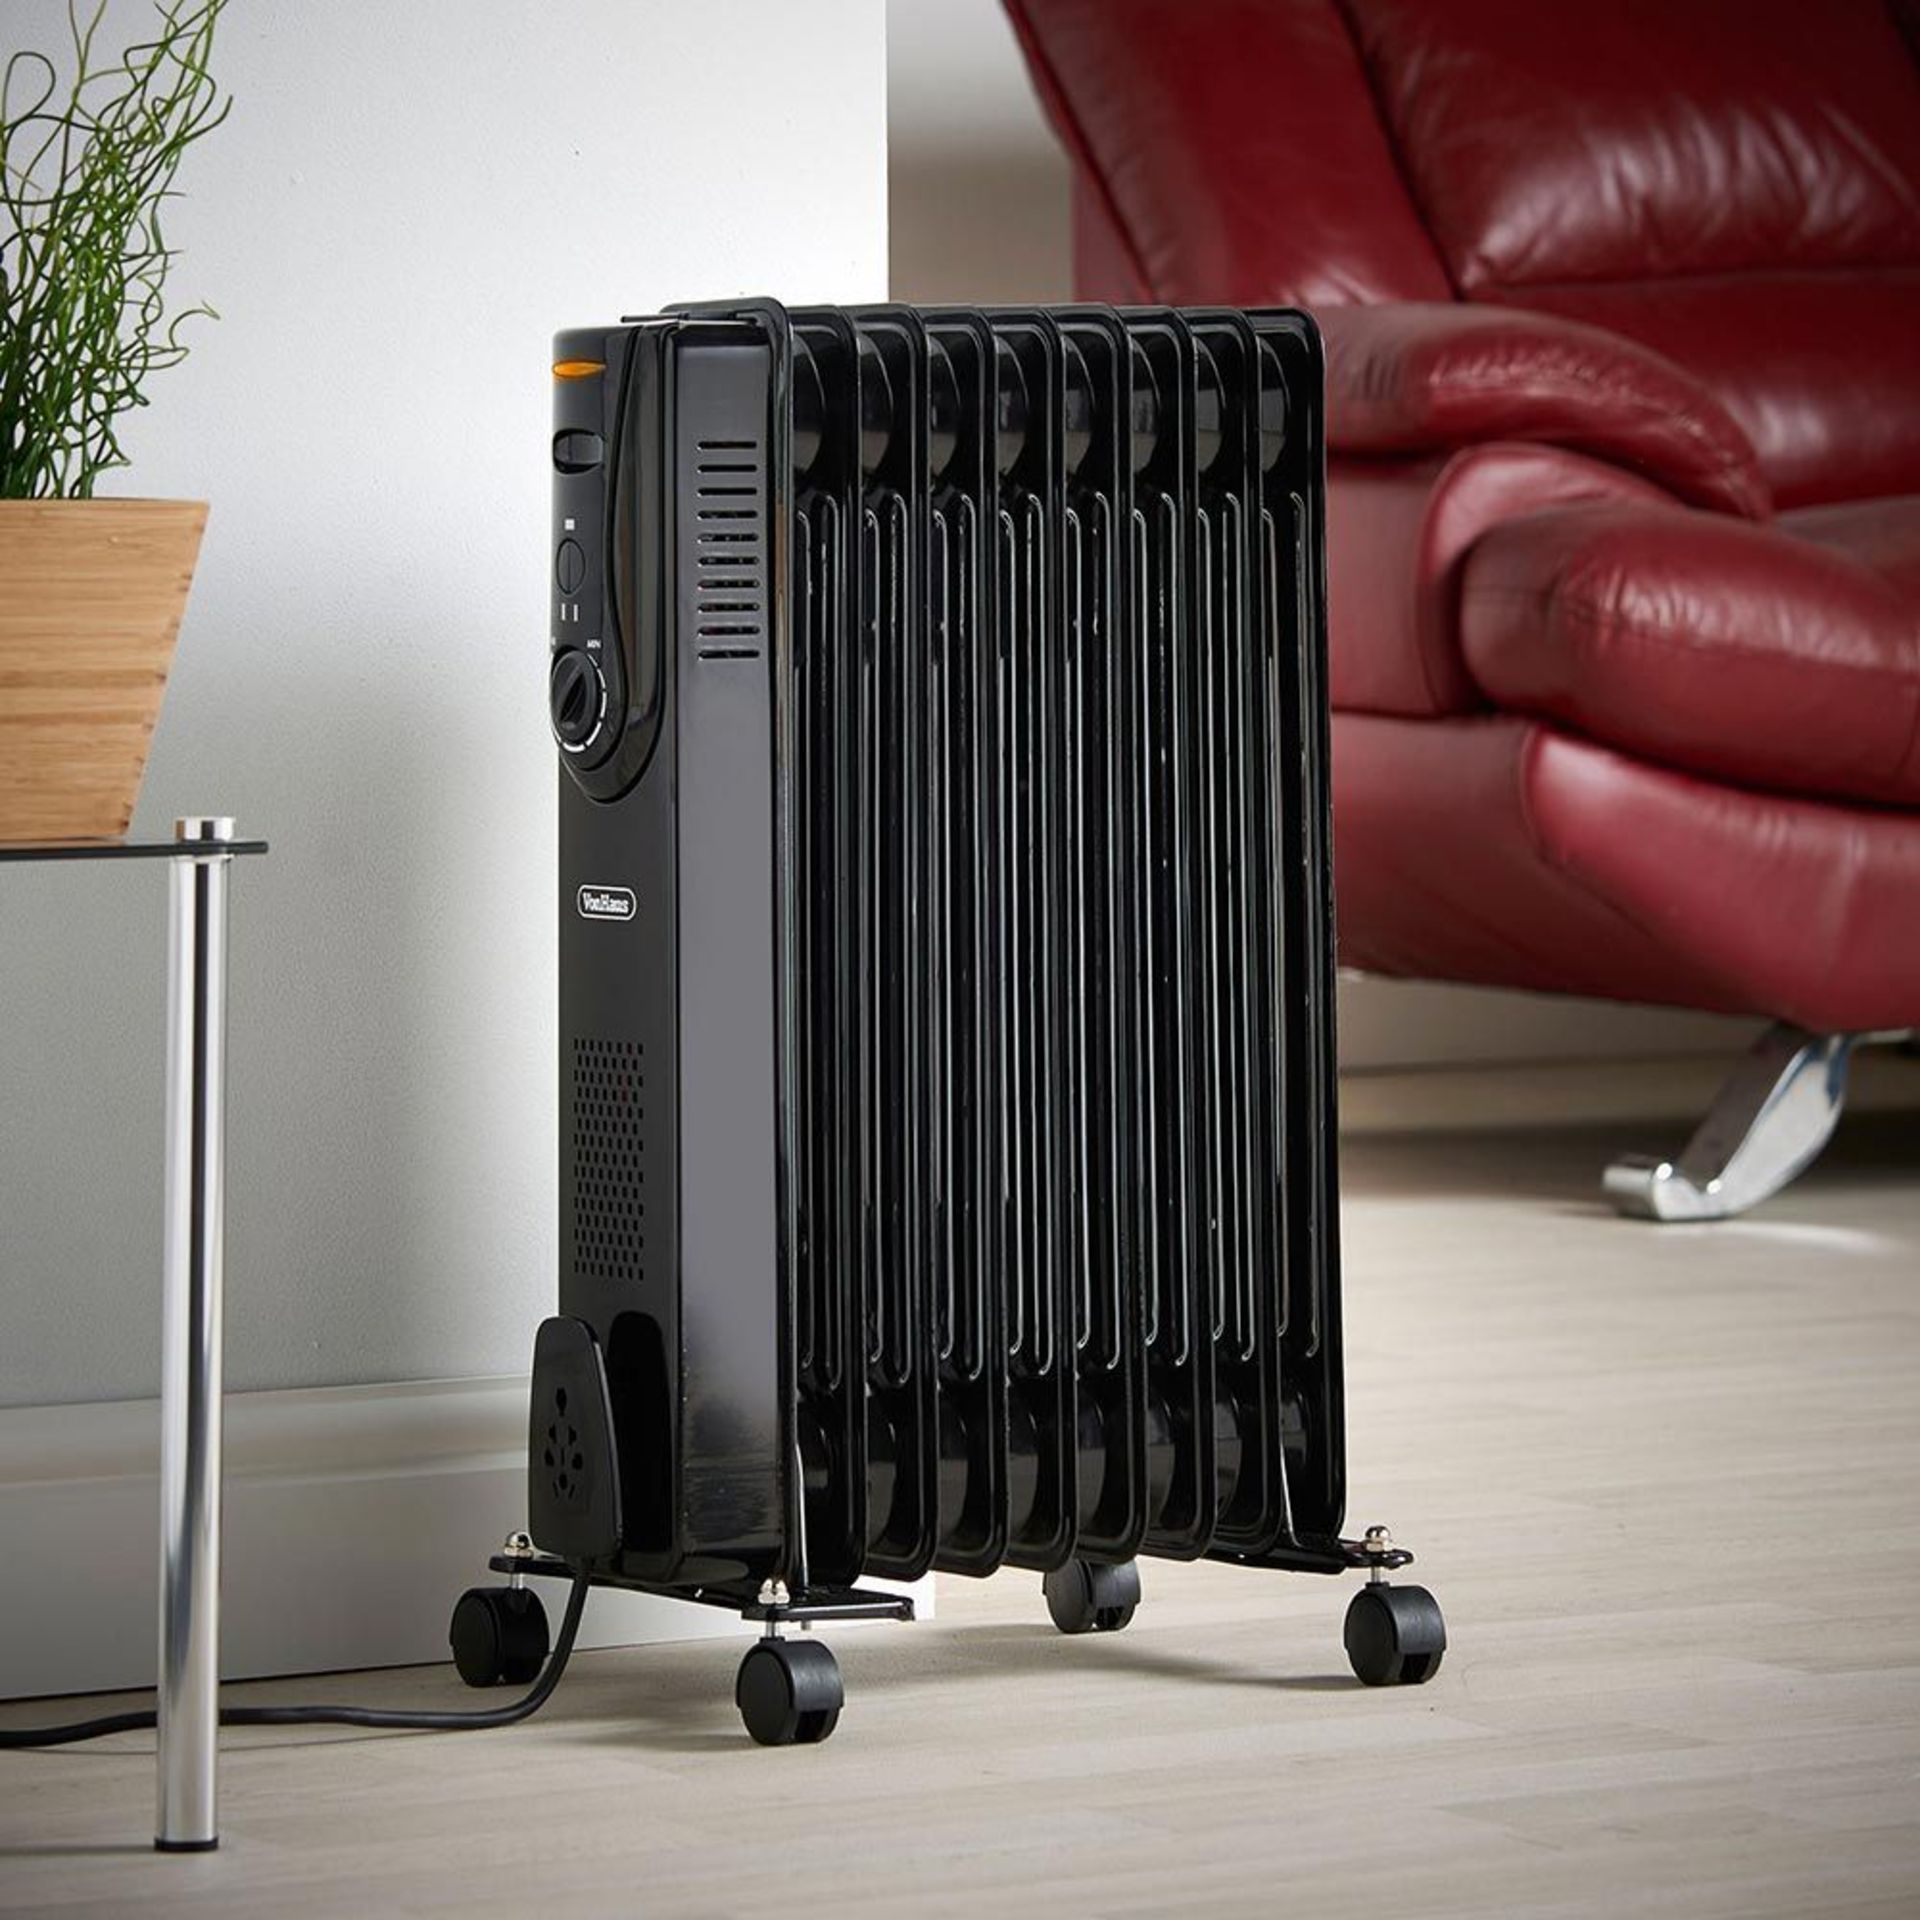 (H67) 9 Fin 2000W Oil Filled Radiator - Black Powerful 2000W radiator with 9 oil-filled fins ?...( - Image 2 of 3